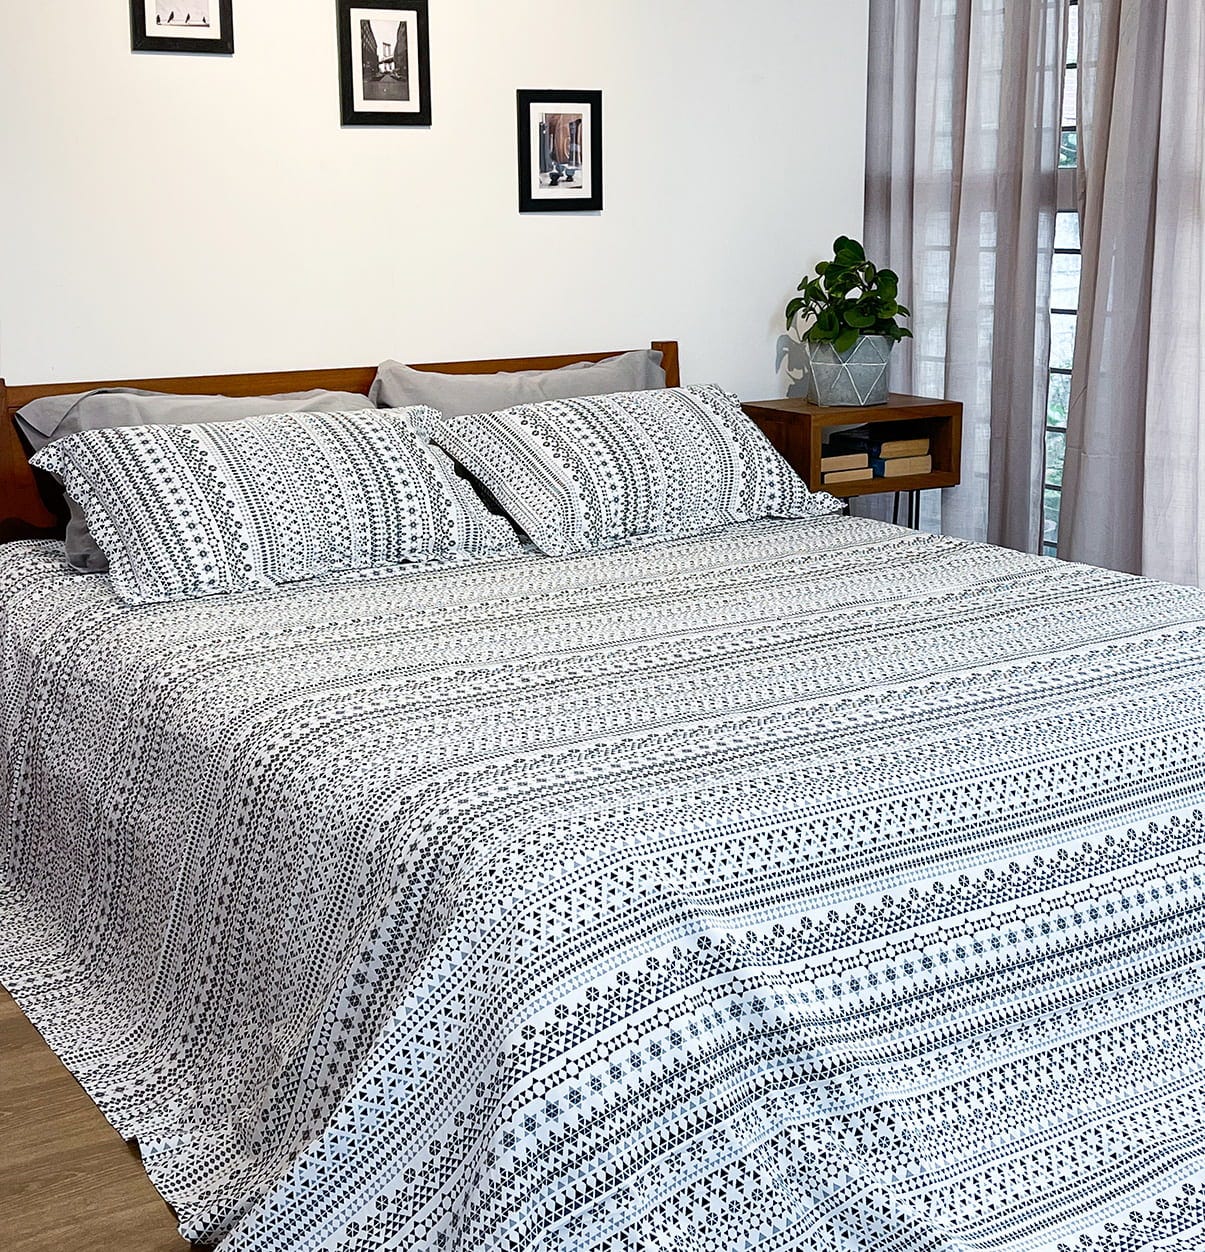 Best Bed Sheet for a Single or Double Bed? | by Sootisyahi Handblock Print  | Medium